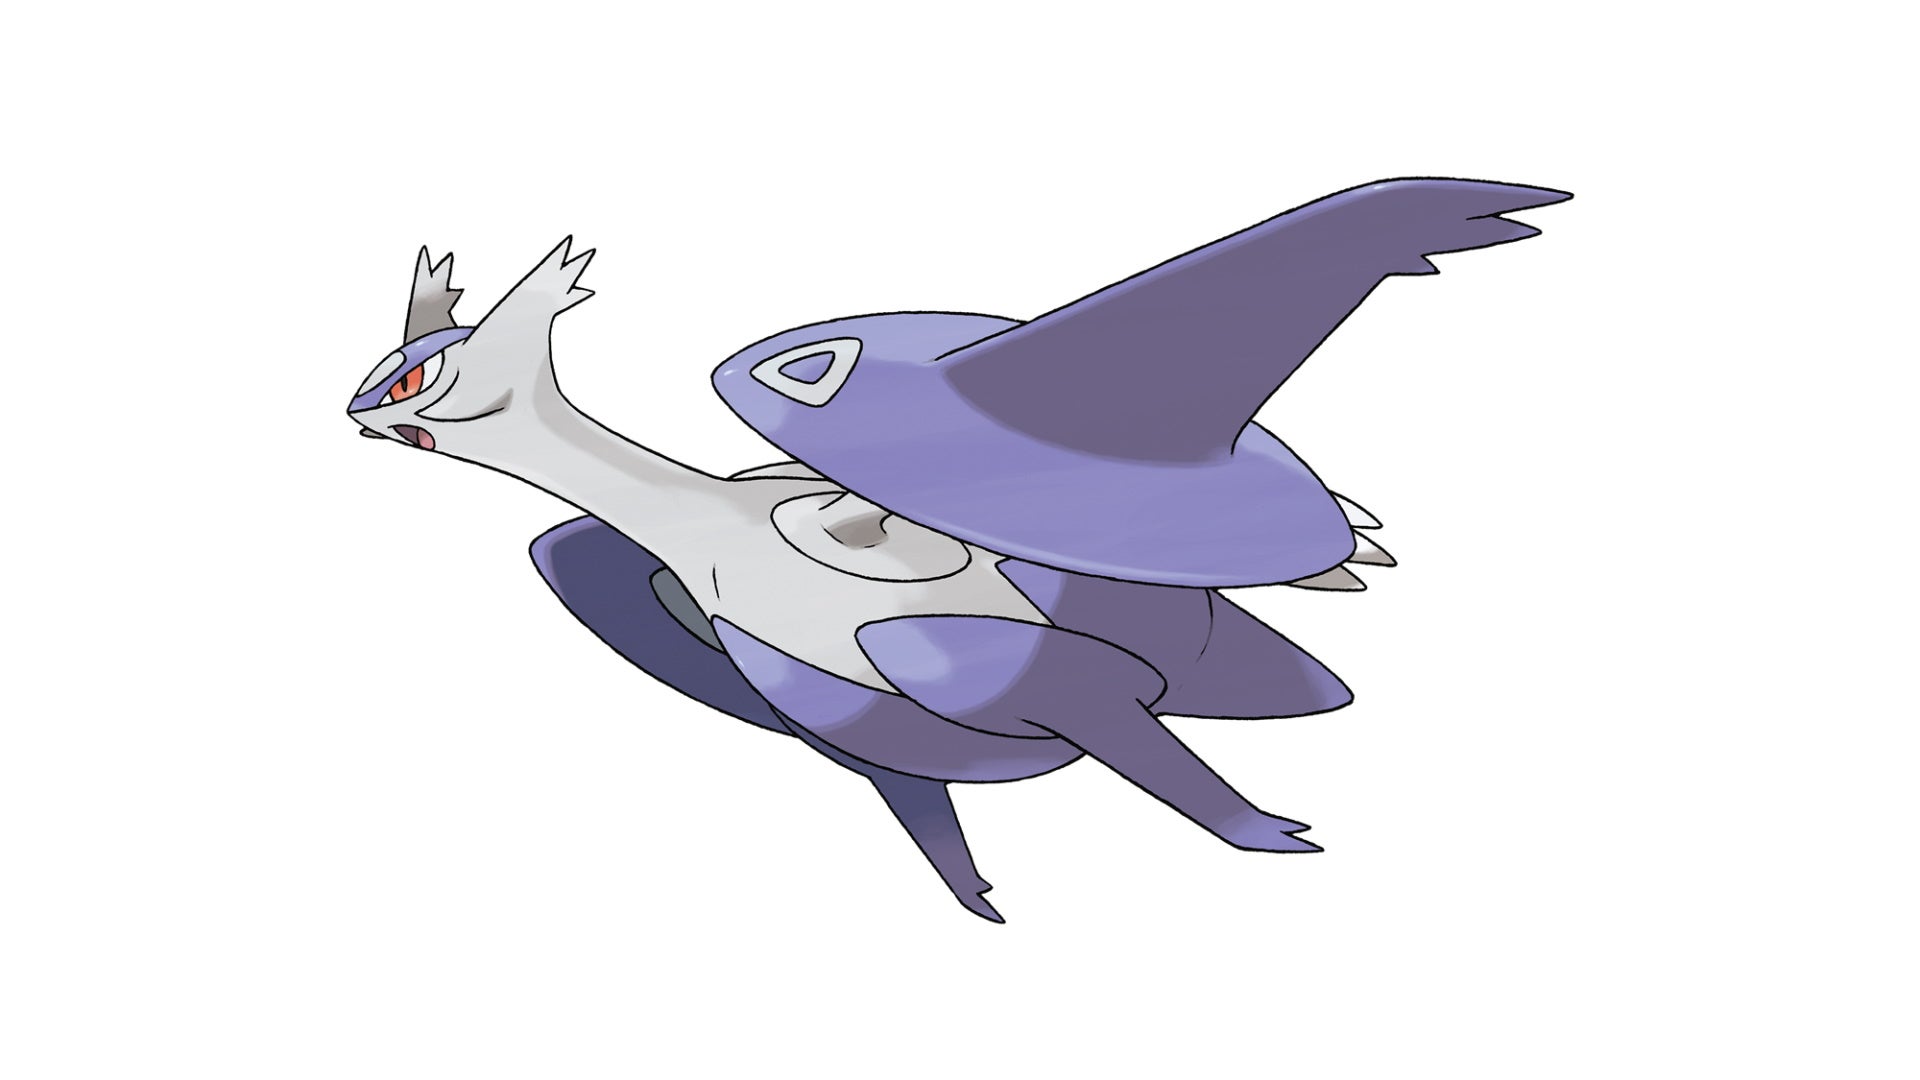 Image for Pokémon Go Mega Latios weakness, counters and best Latios moveset